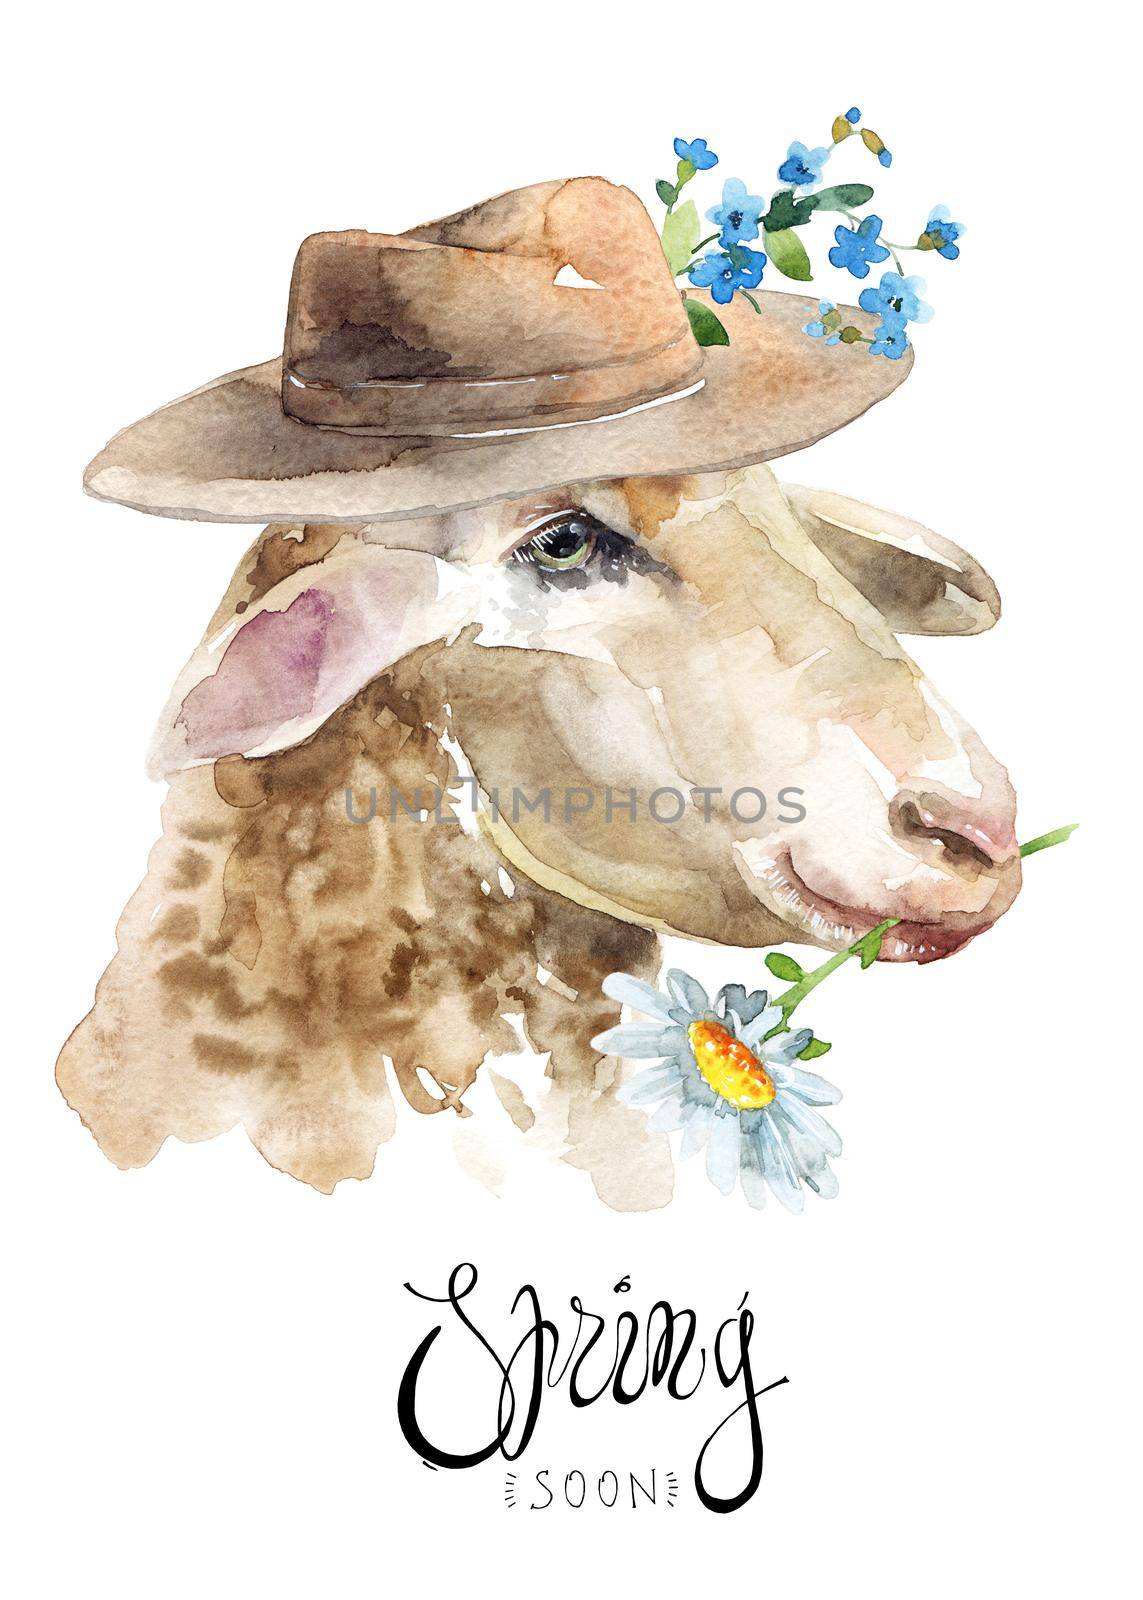 Watercolor illustration of sheep portrait with hat and flowers on the hat and flower in a mouth. Greeting card with text area and calligraphy lettering "Spring soon"